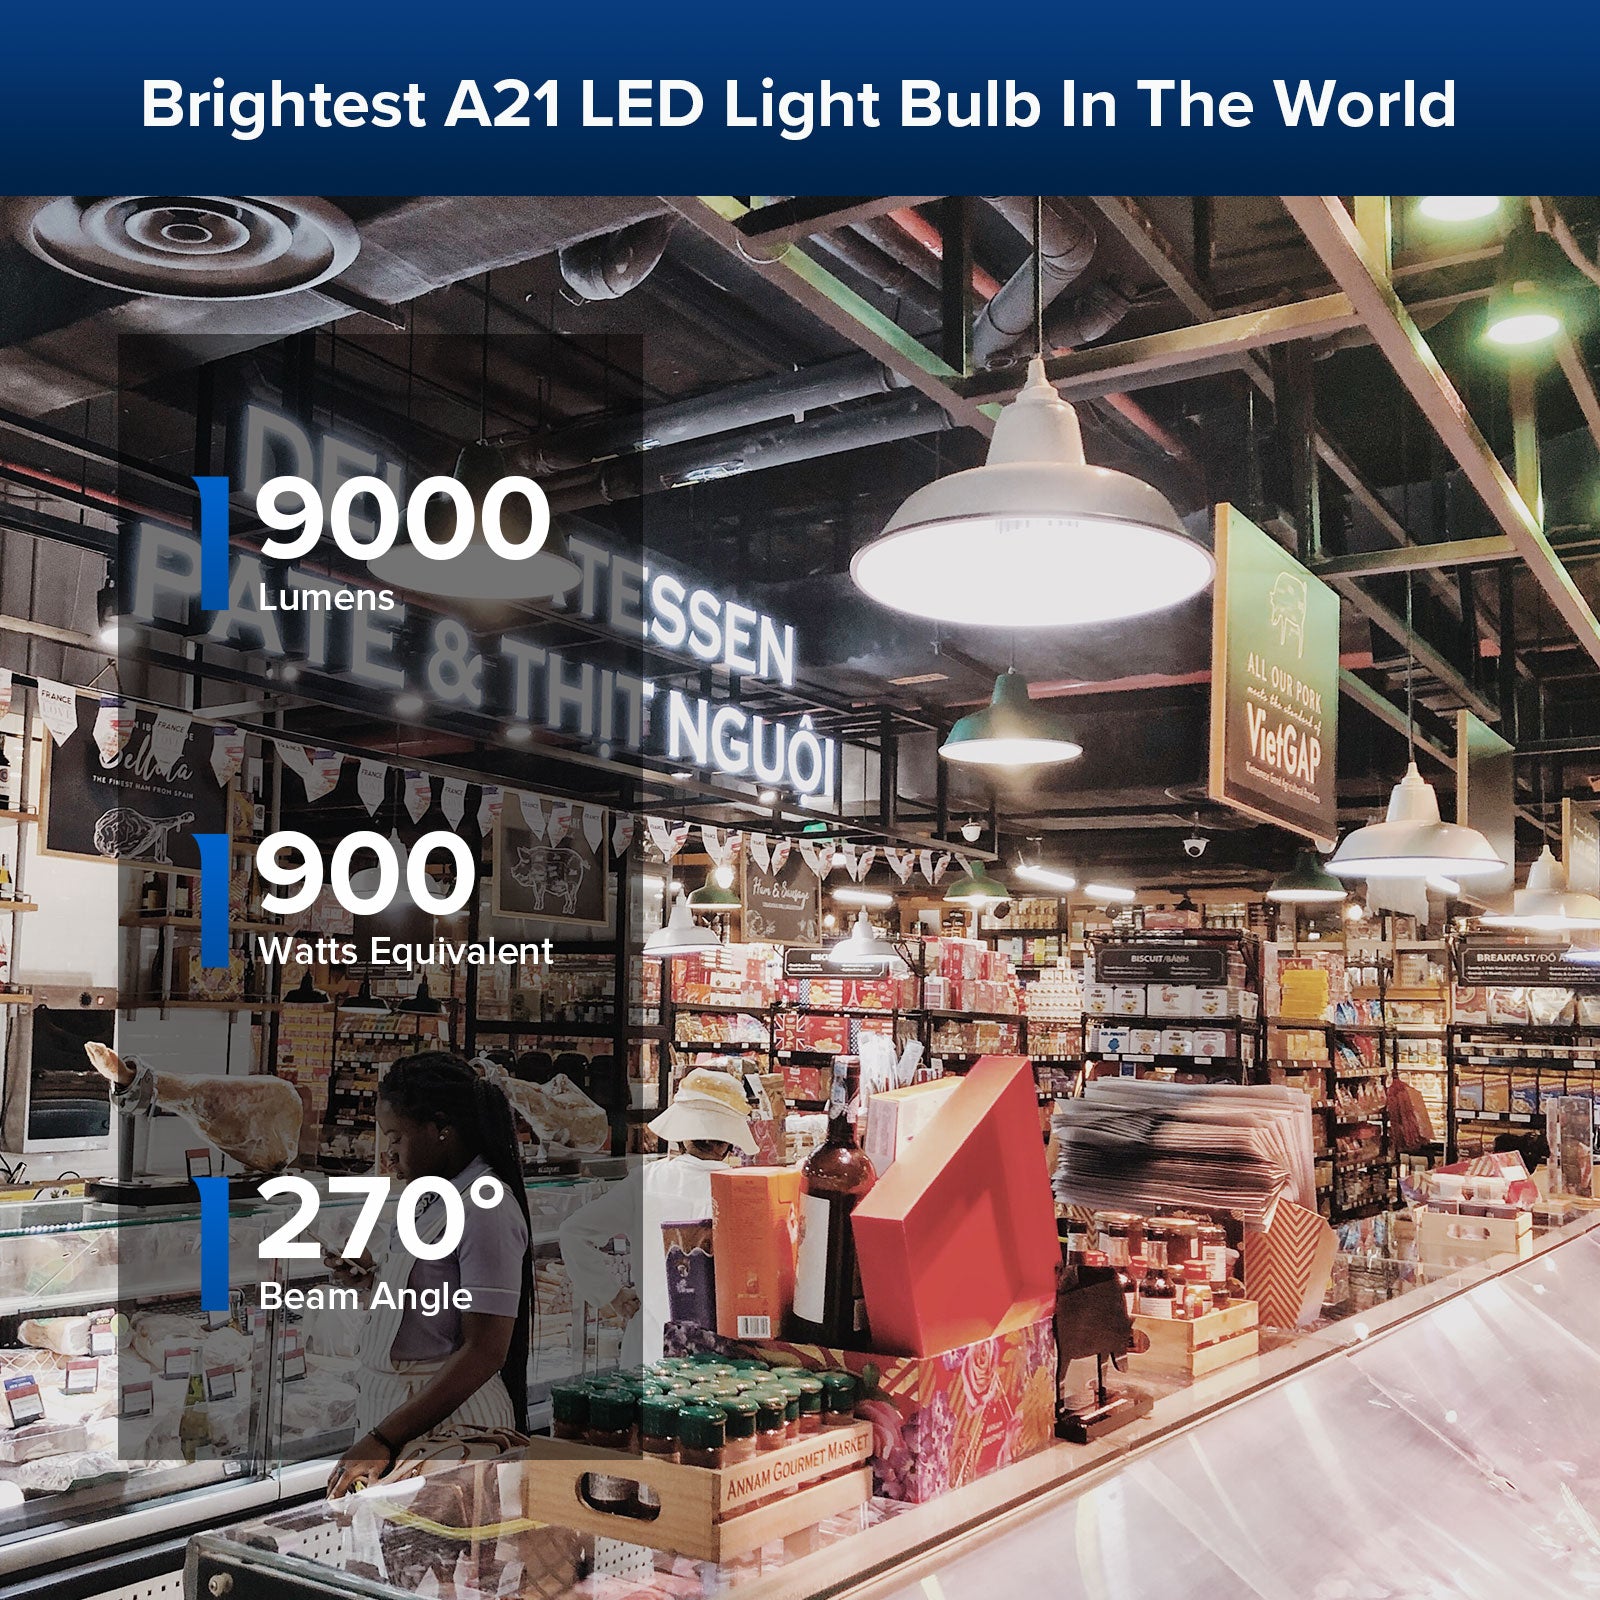 A21 60W LED 5000K Light Bulb (US ONLY)，brightest A21 LED Light Bulb In The World，9000lm，900W equivalent，270° beam angle.